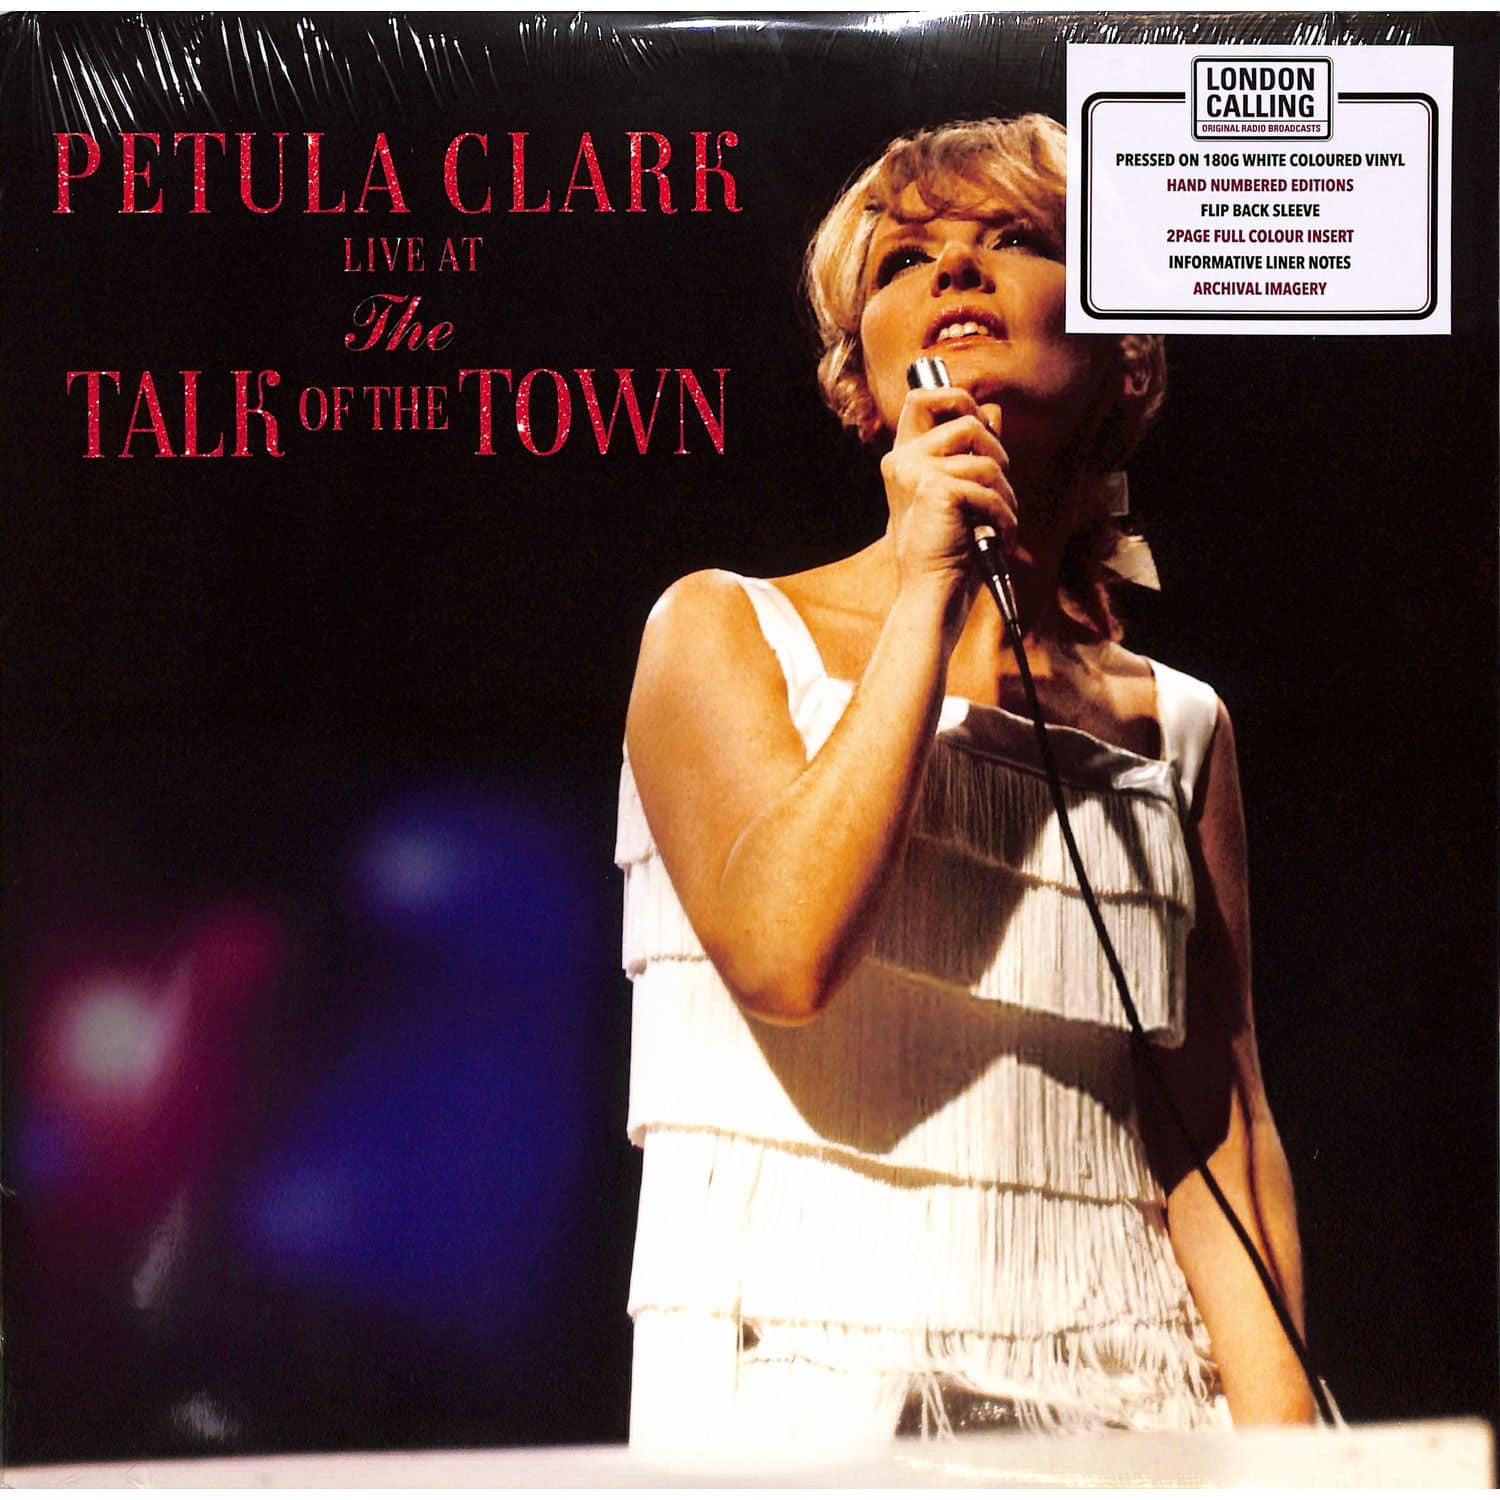 Petula Clark - LIVE AT THE TALK OF THE TOWN 